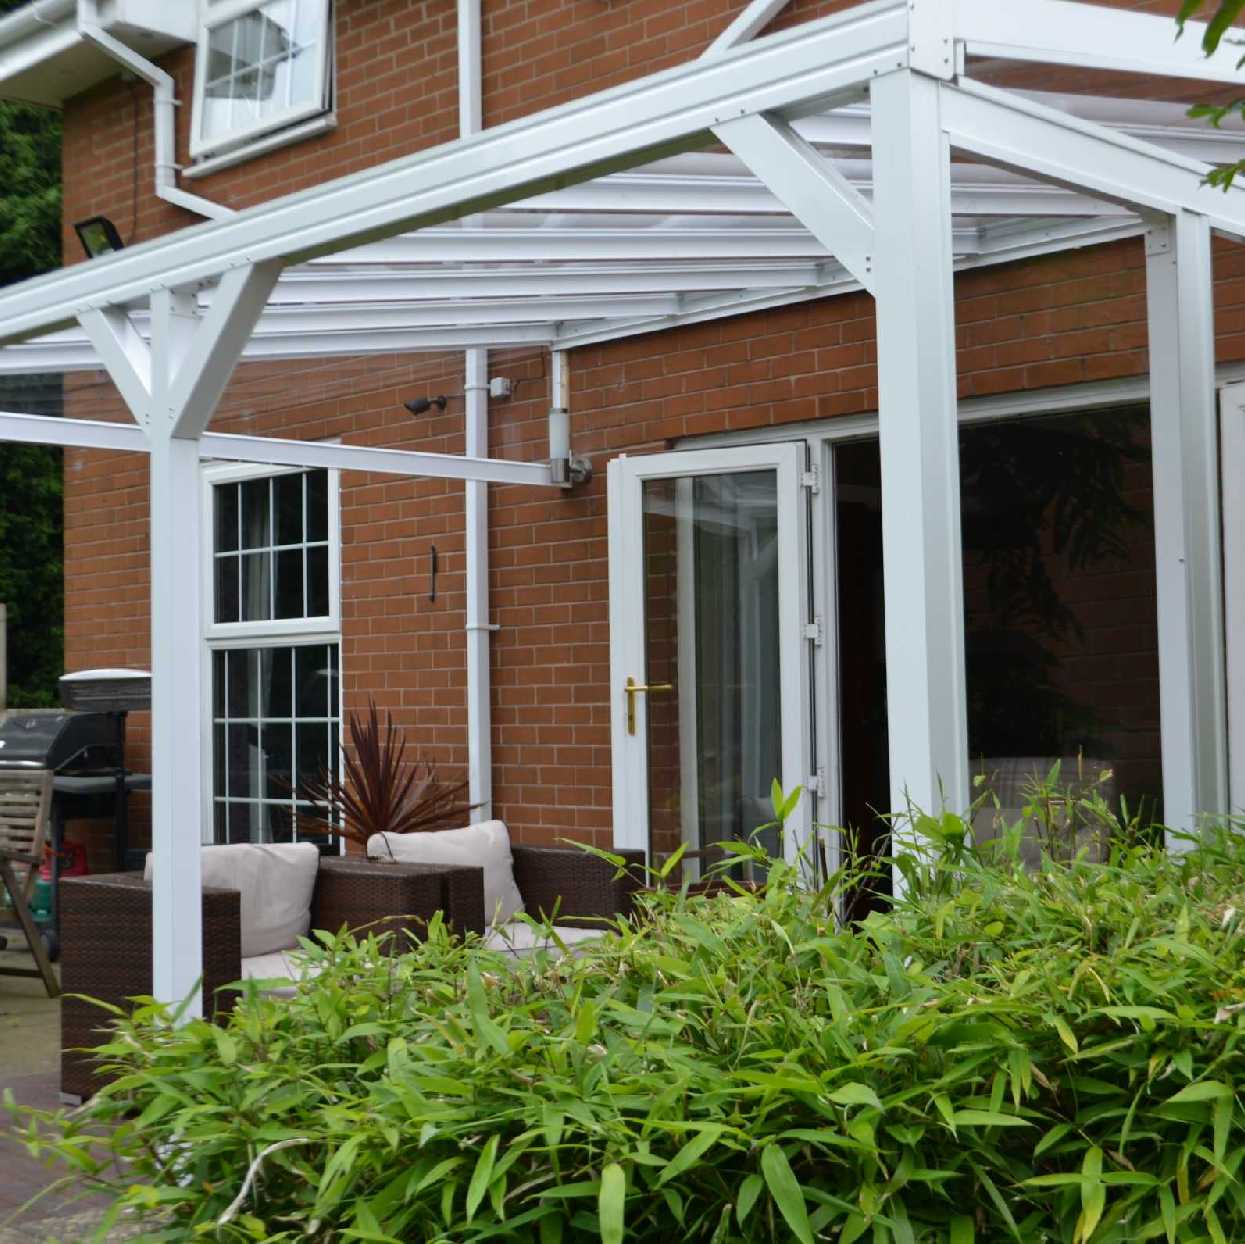 Omega Smart Lean-To Canopy, White UNGLAZED for 6mm Glazing - 7.0m (W) x 2.0m (P), (4) Supporting Posts from Omega Build